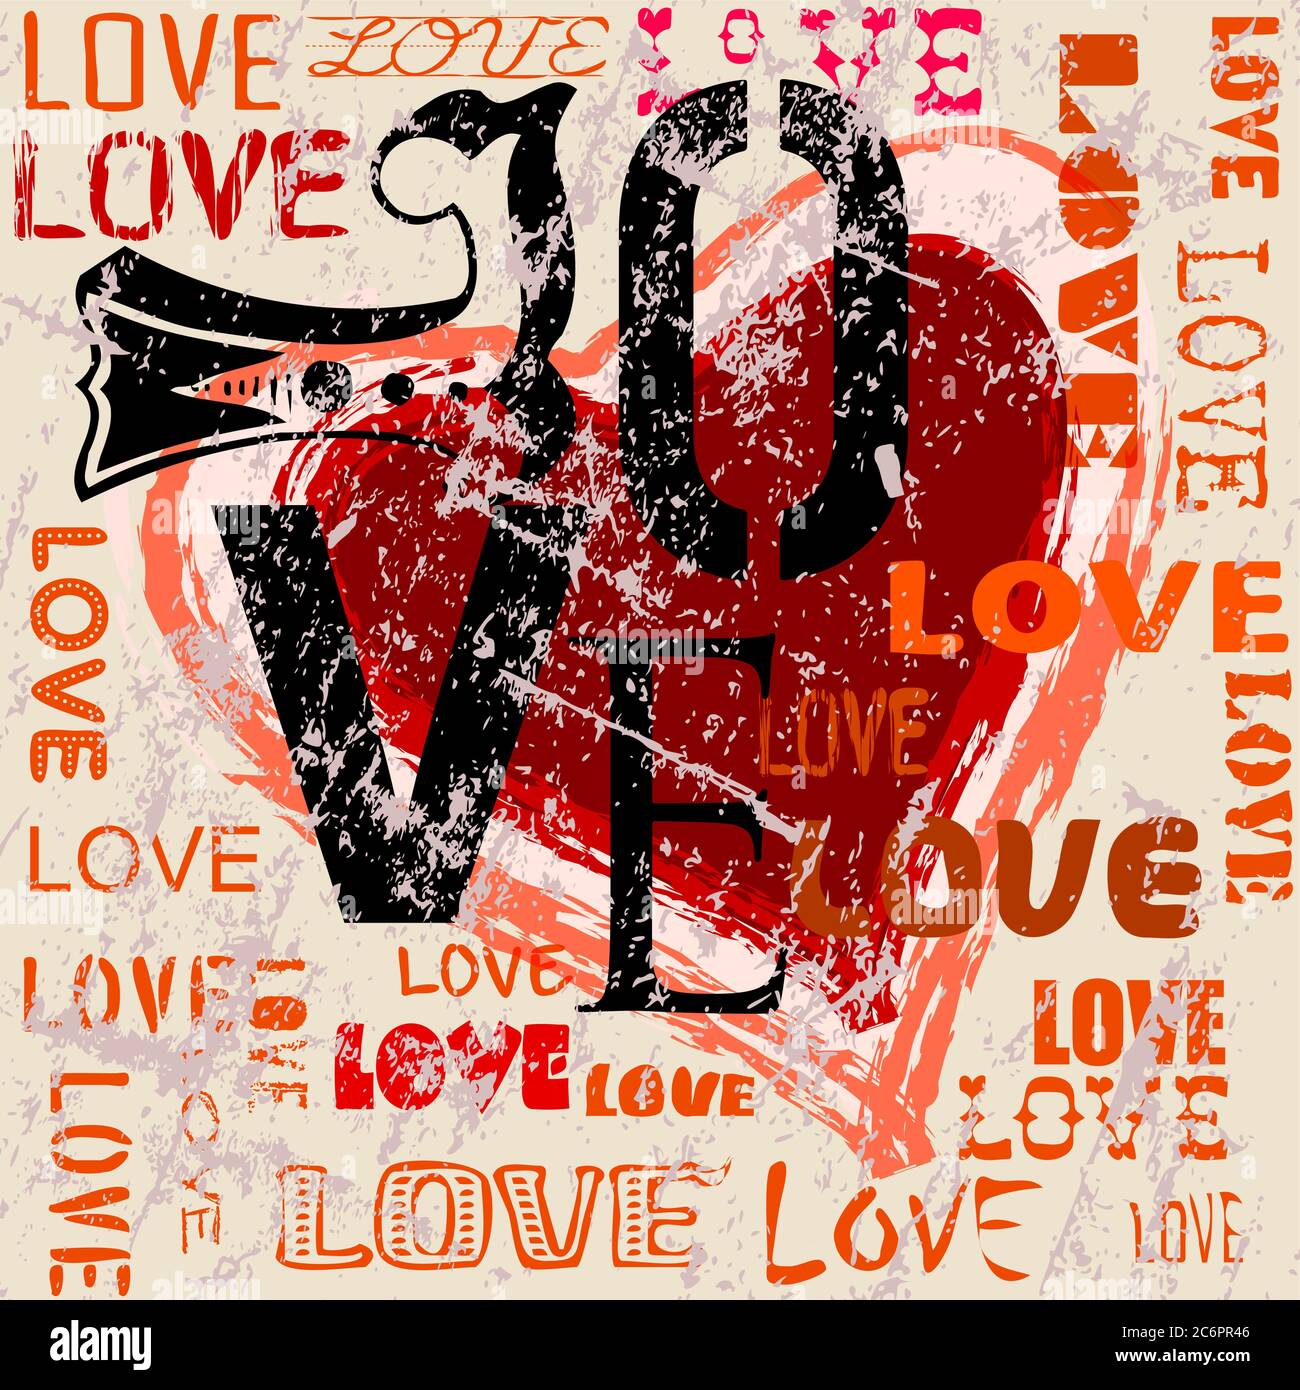 Love emotion, vintage and grungy illustration, this vector art can be used as a greeting card for wedding, engagement, valentines day. Stock Vector